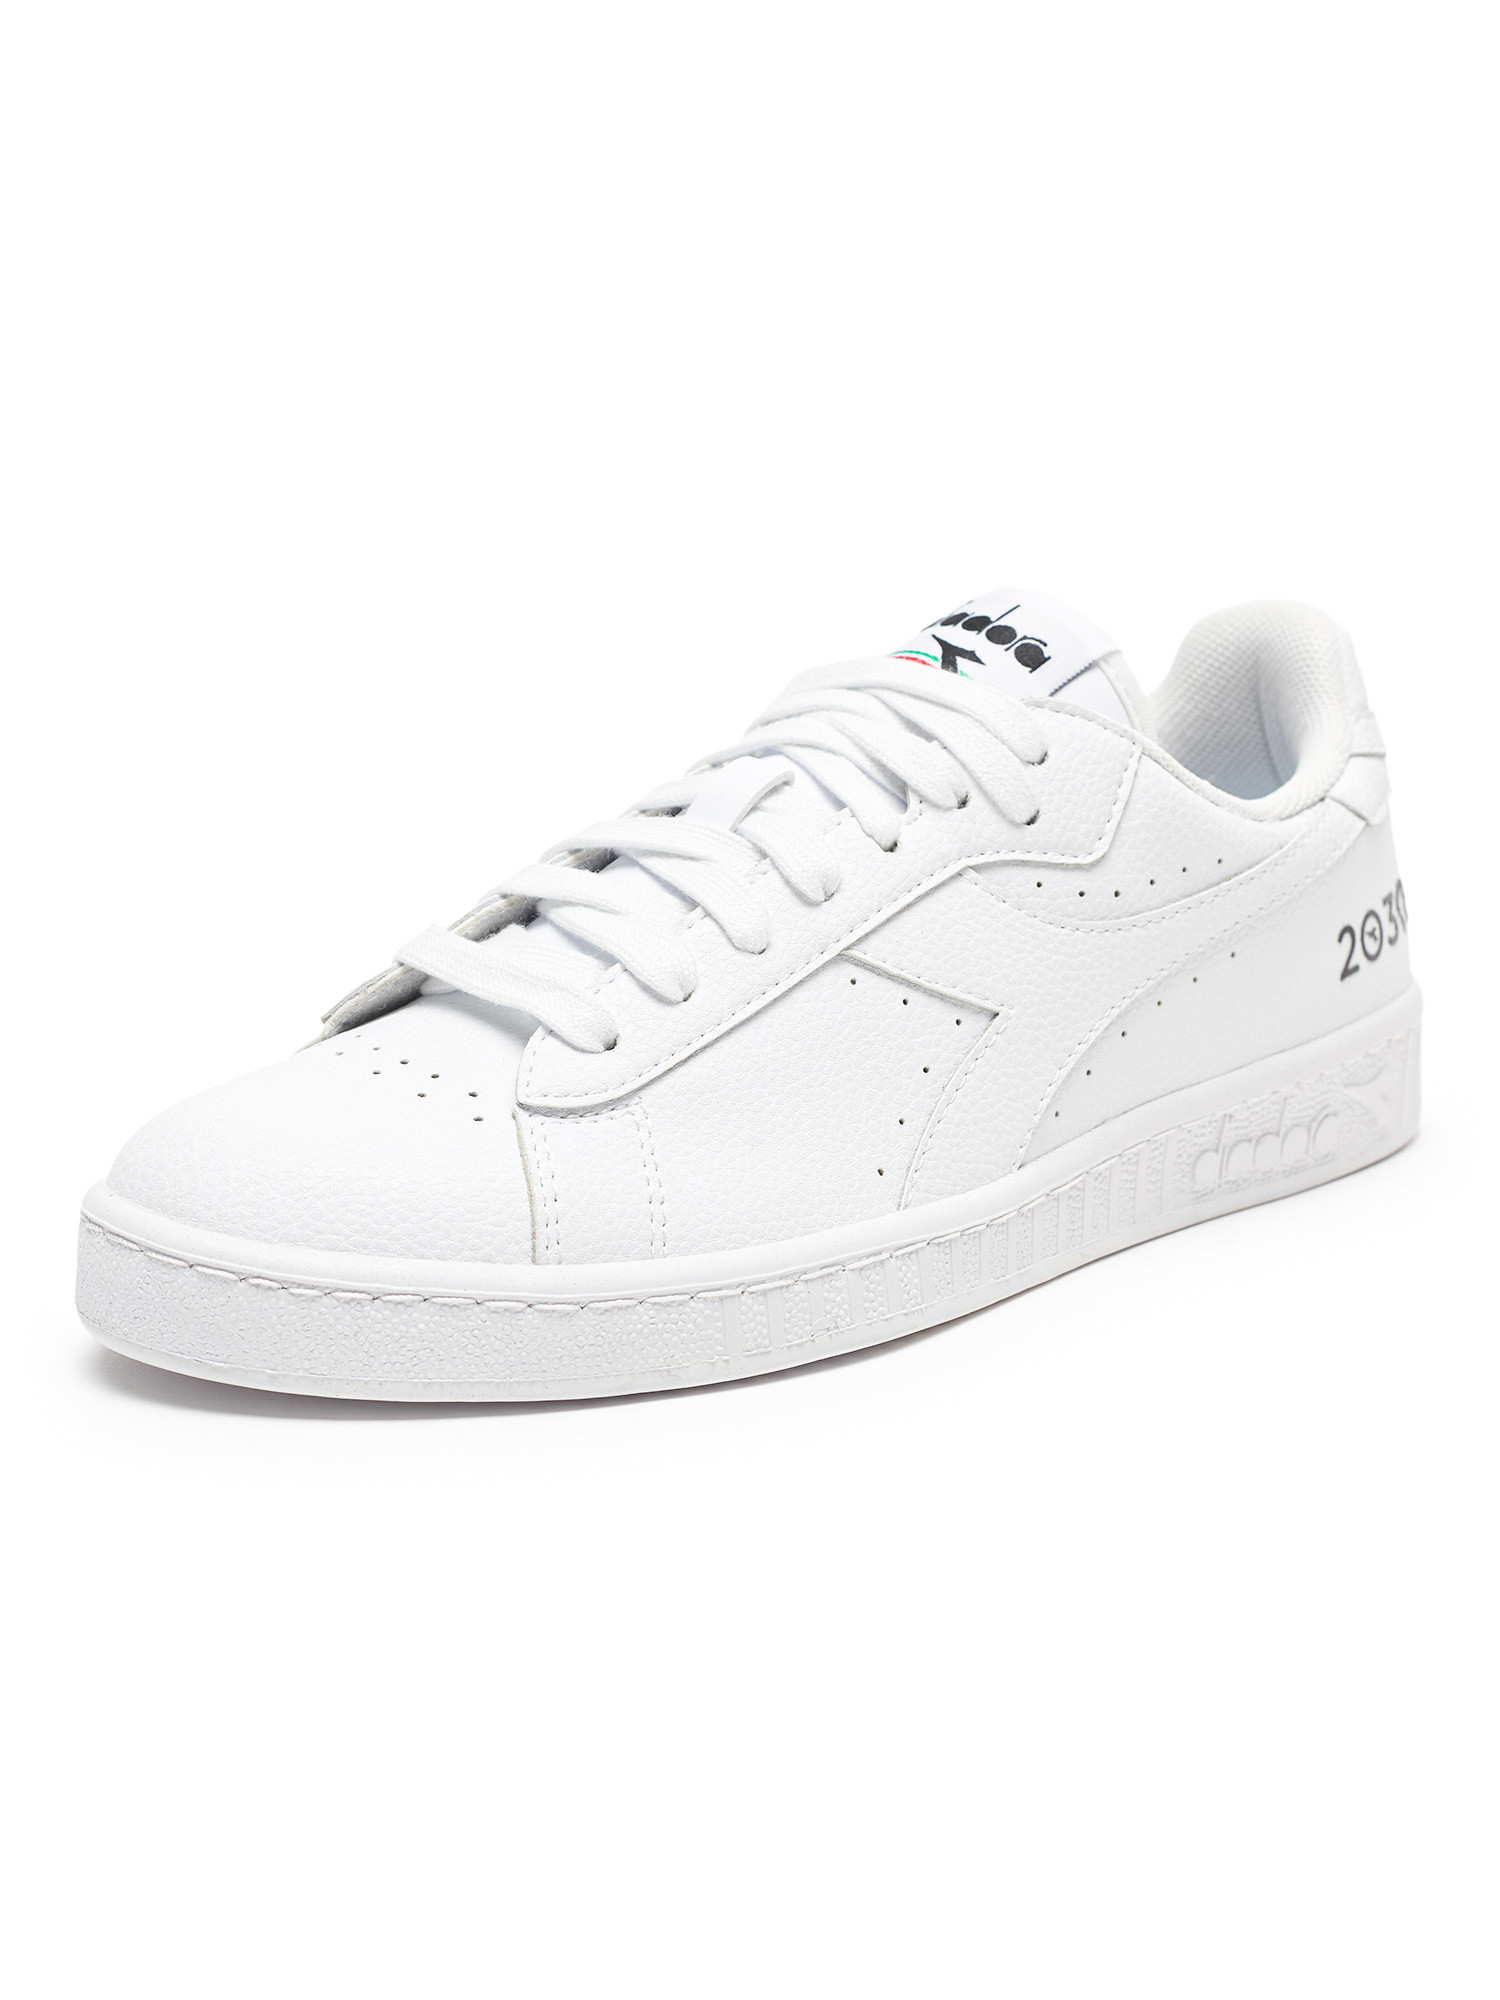 Diadora - Game L Low 2030 Shoes, White, large image number 1